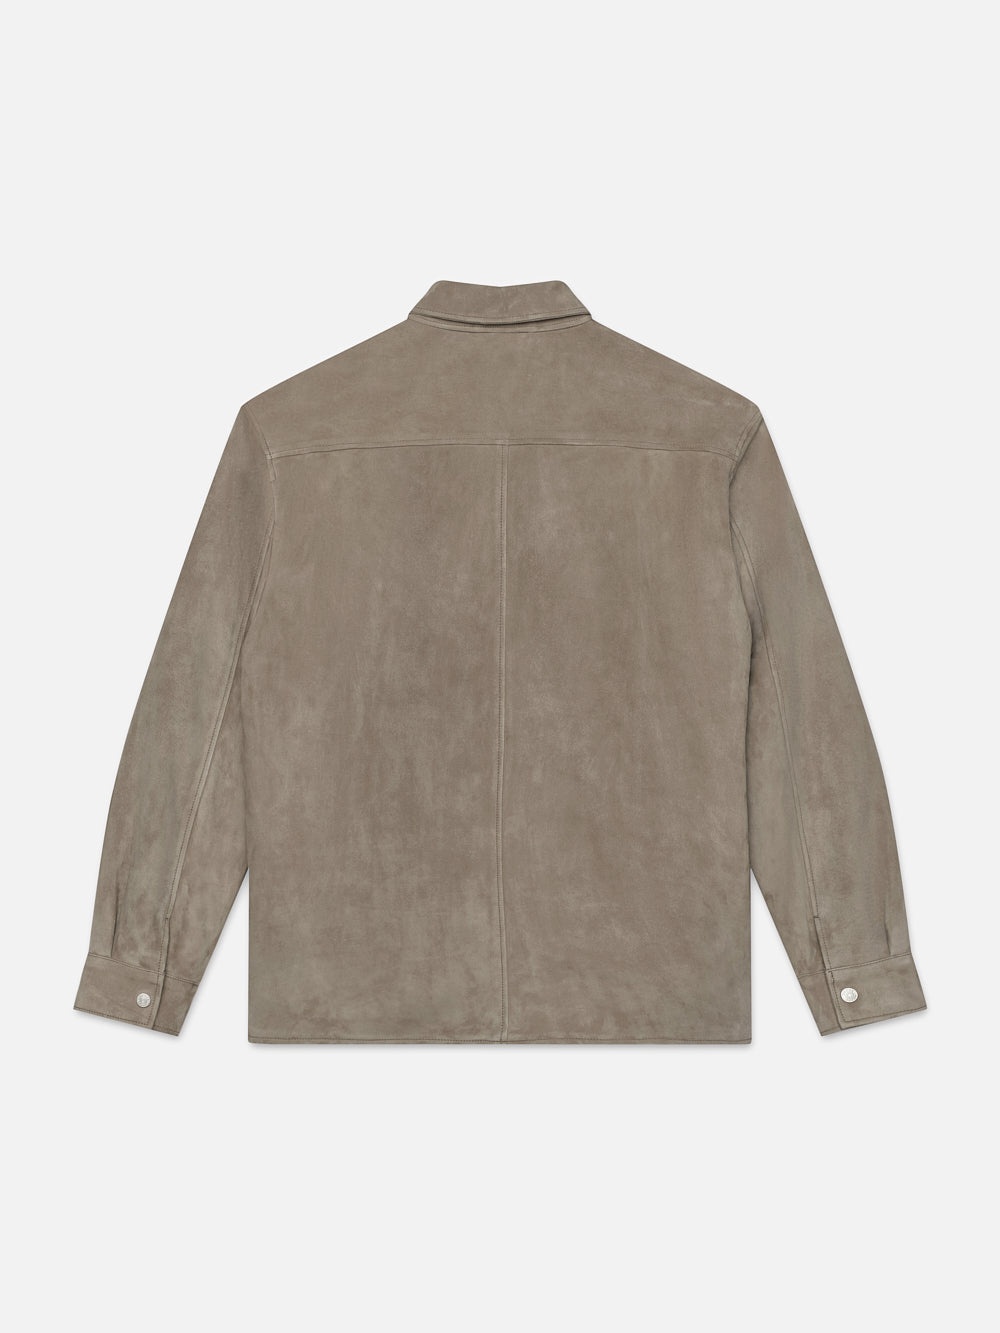 Long Sleeve Suede Padded Shirt in Stone Beige - 3